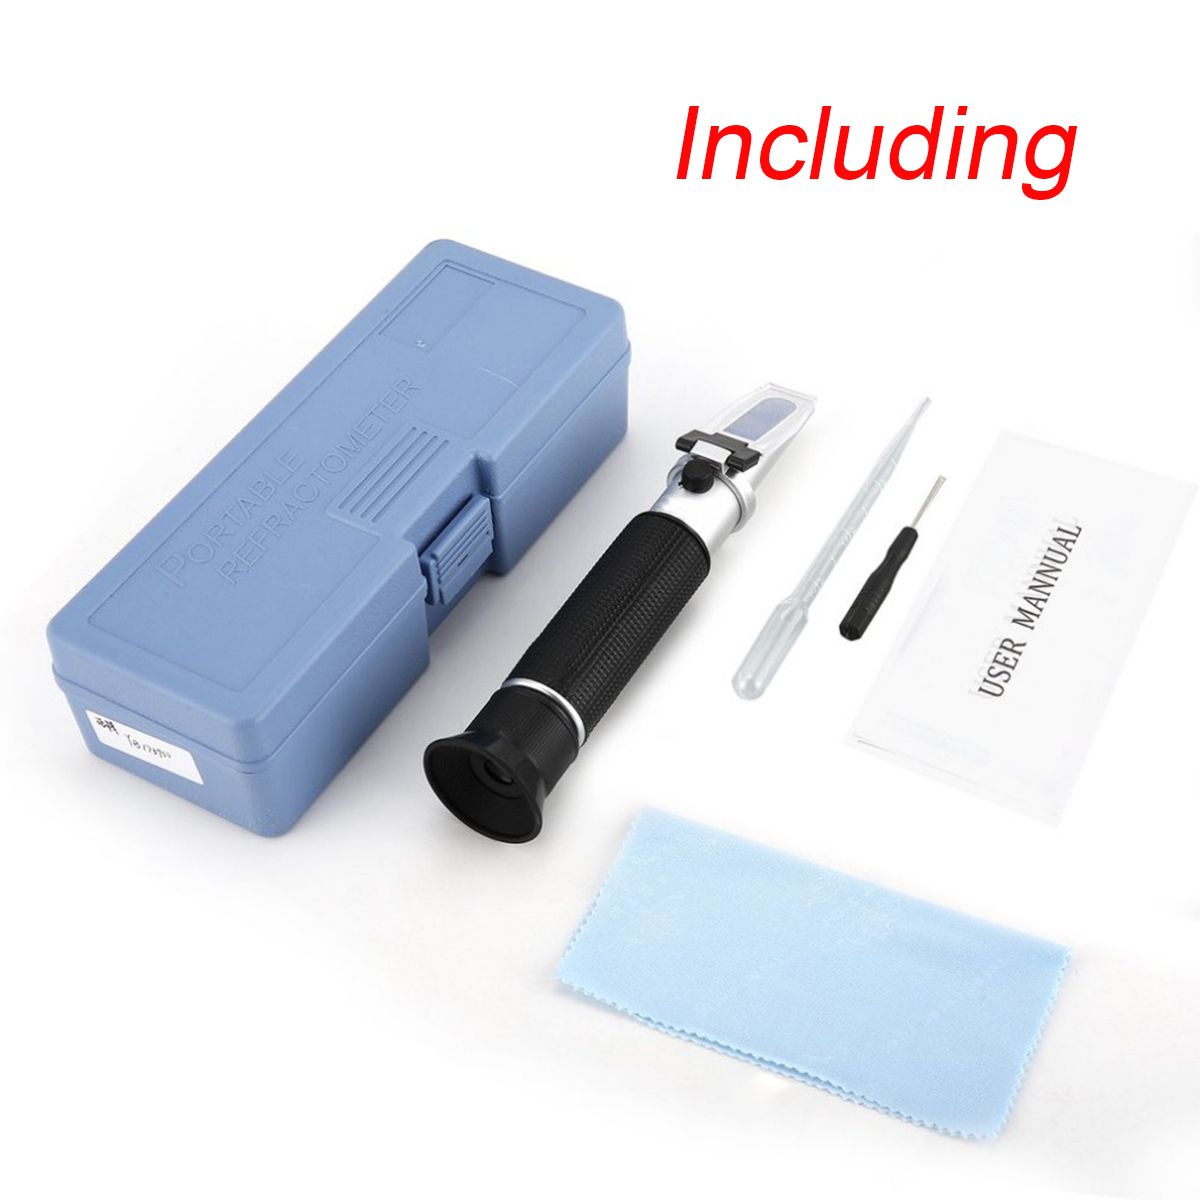 Refractometer-Alcohol-Alcoholometer-080-ATC-Handheld-Tool-Alcohol-Meter-1549745